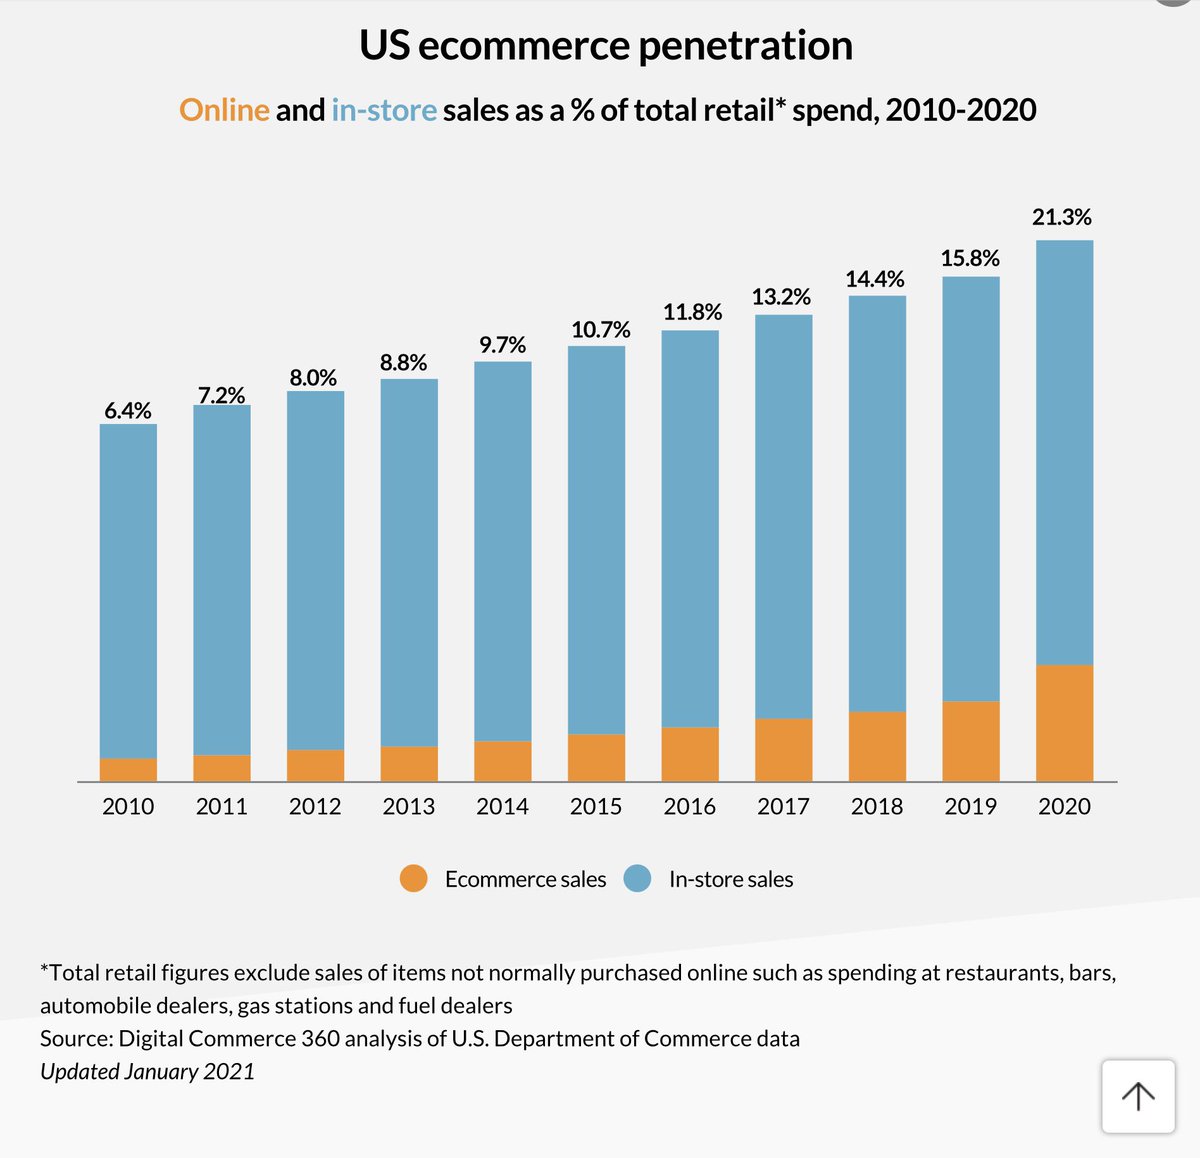 Focusing on the e-commerce industry, US e-commerce penetration totaled just 21.3% in 2020. Given that Amazon when last recorded maintained 31.4% of all US e-commerce sales, it is safe to say steady growth is ahead as e-commerce penetration increases.